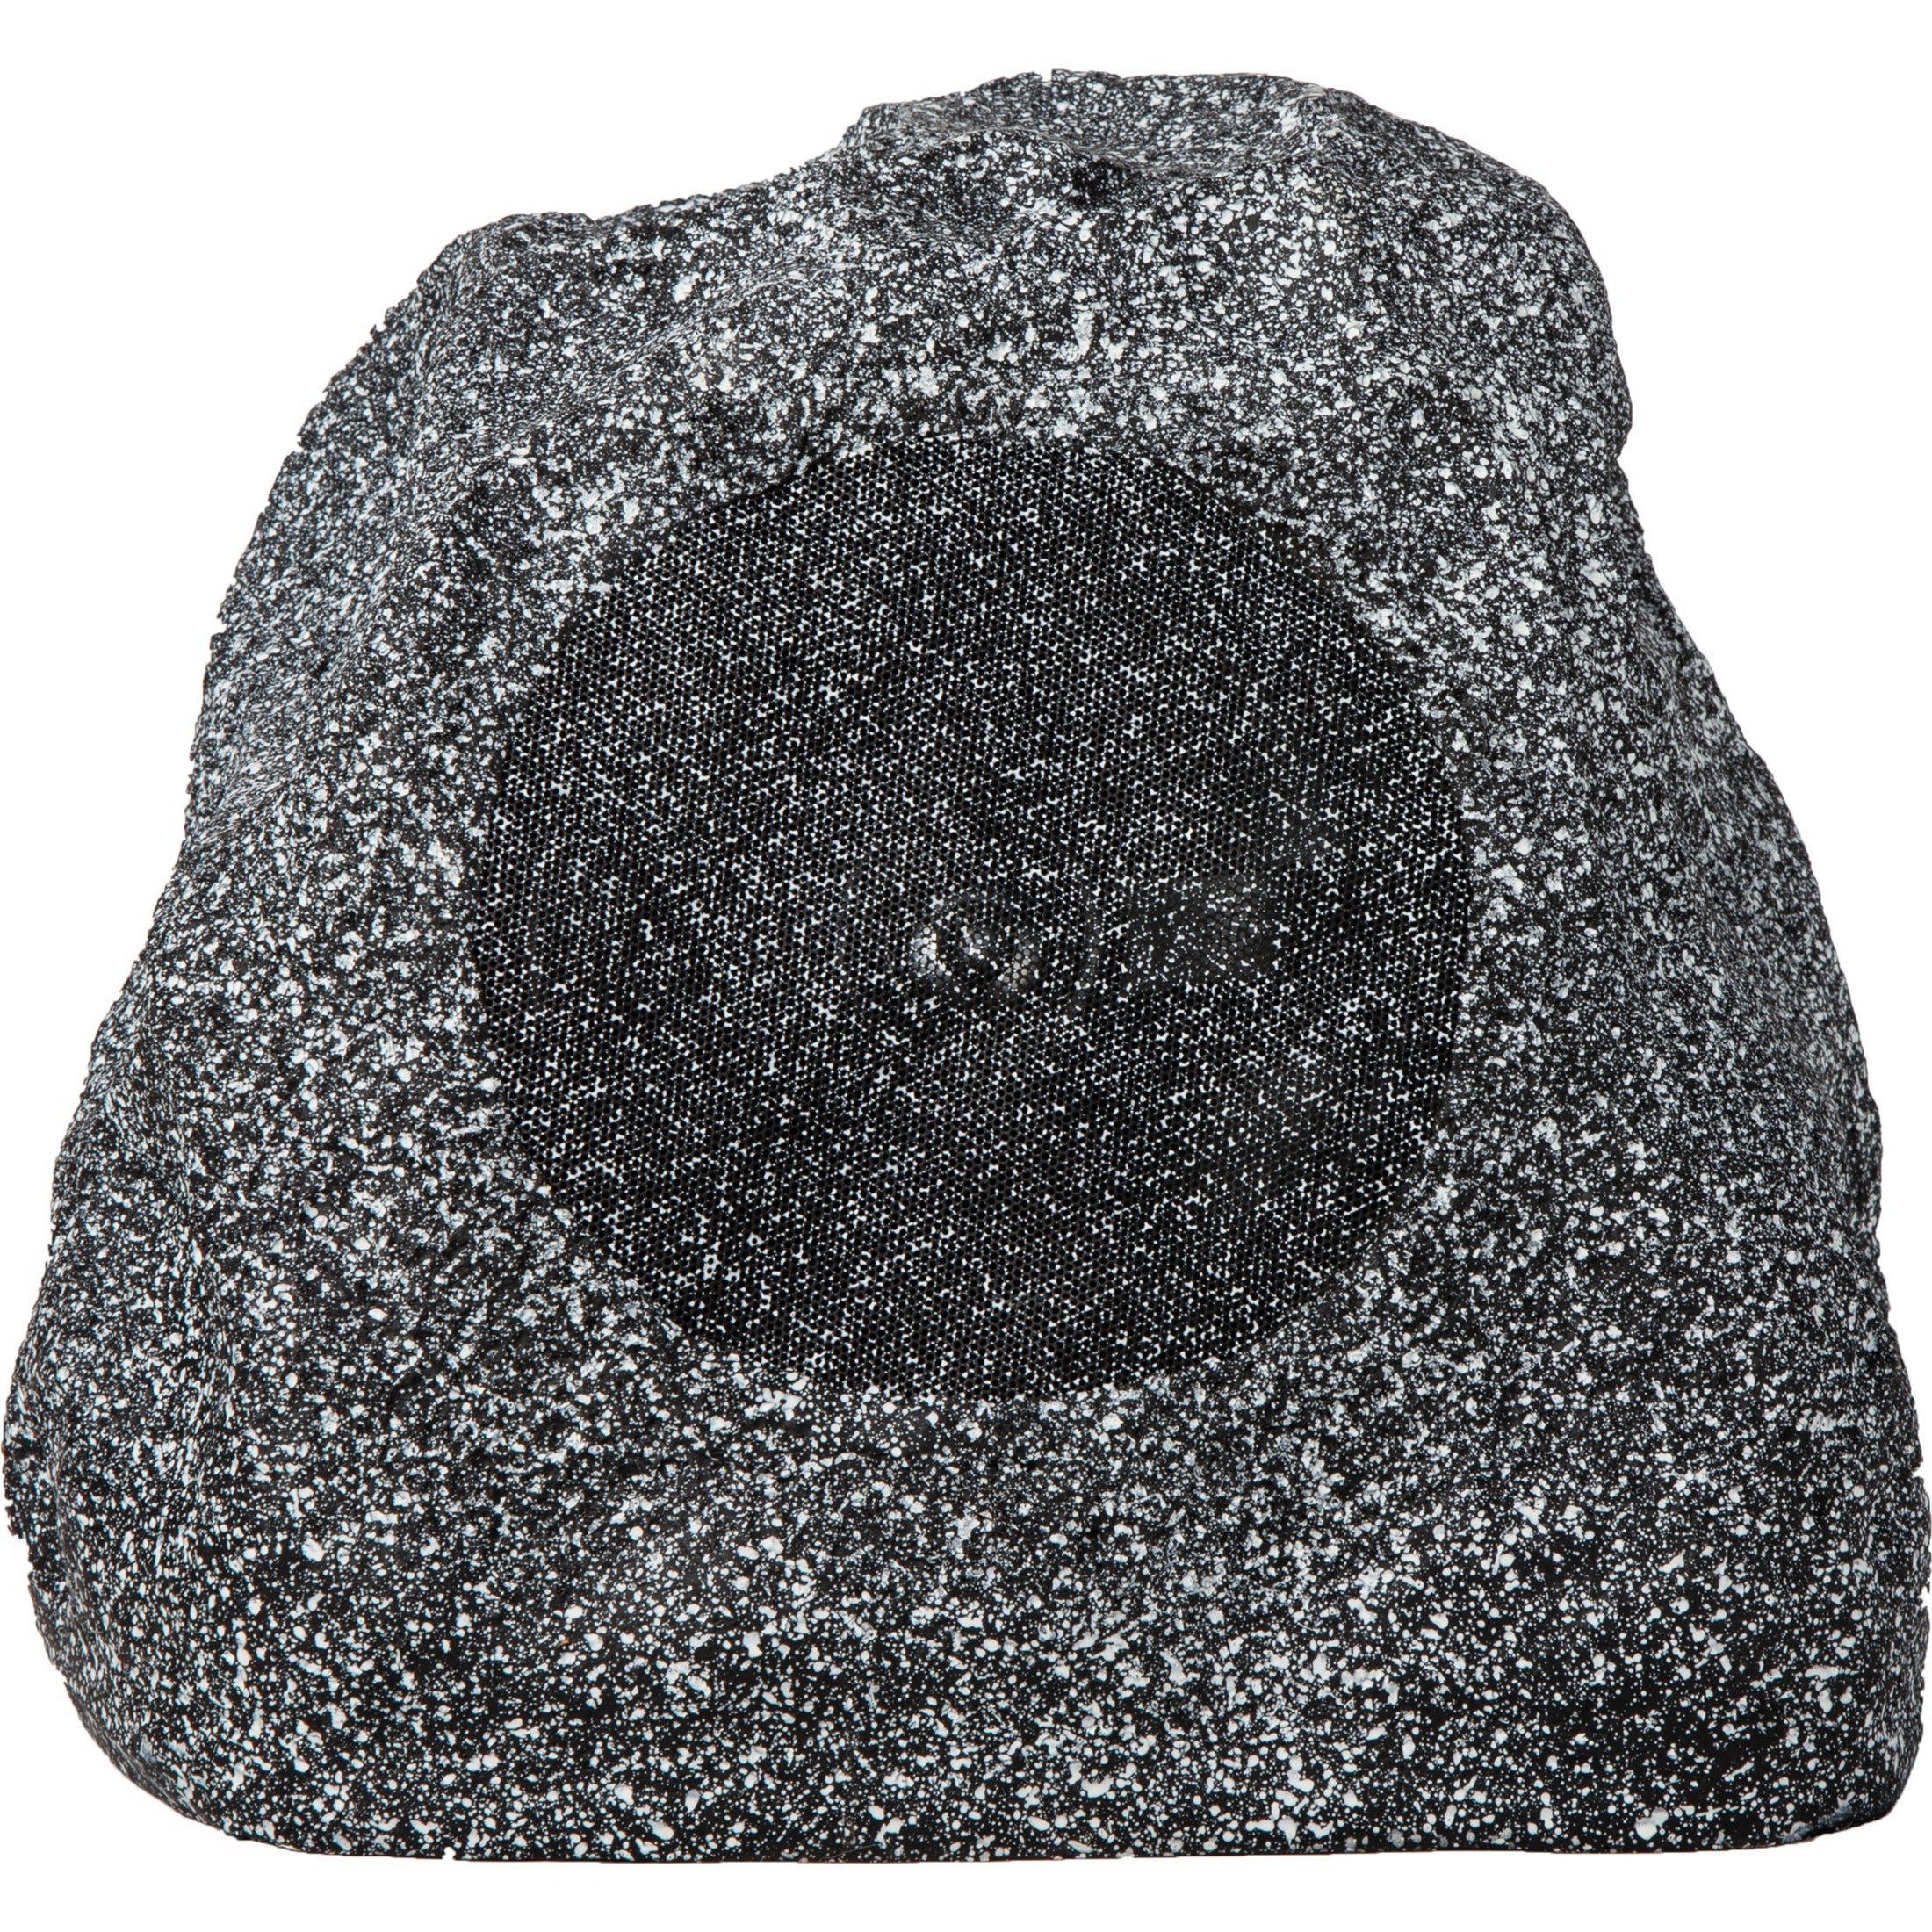 Russound 5R82MK2-G 8 OutBack Rock Speaker, Gray Granite, 2-Way, 125W RMS Output Power